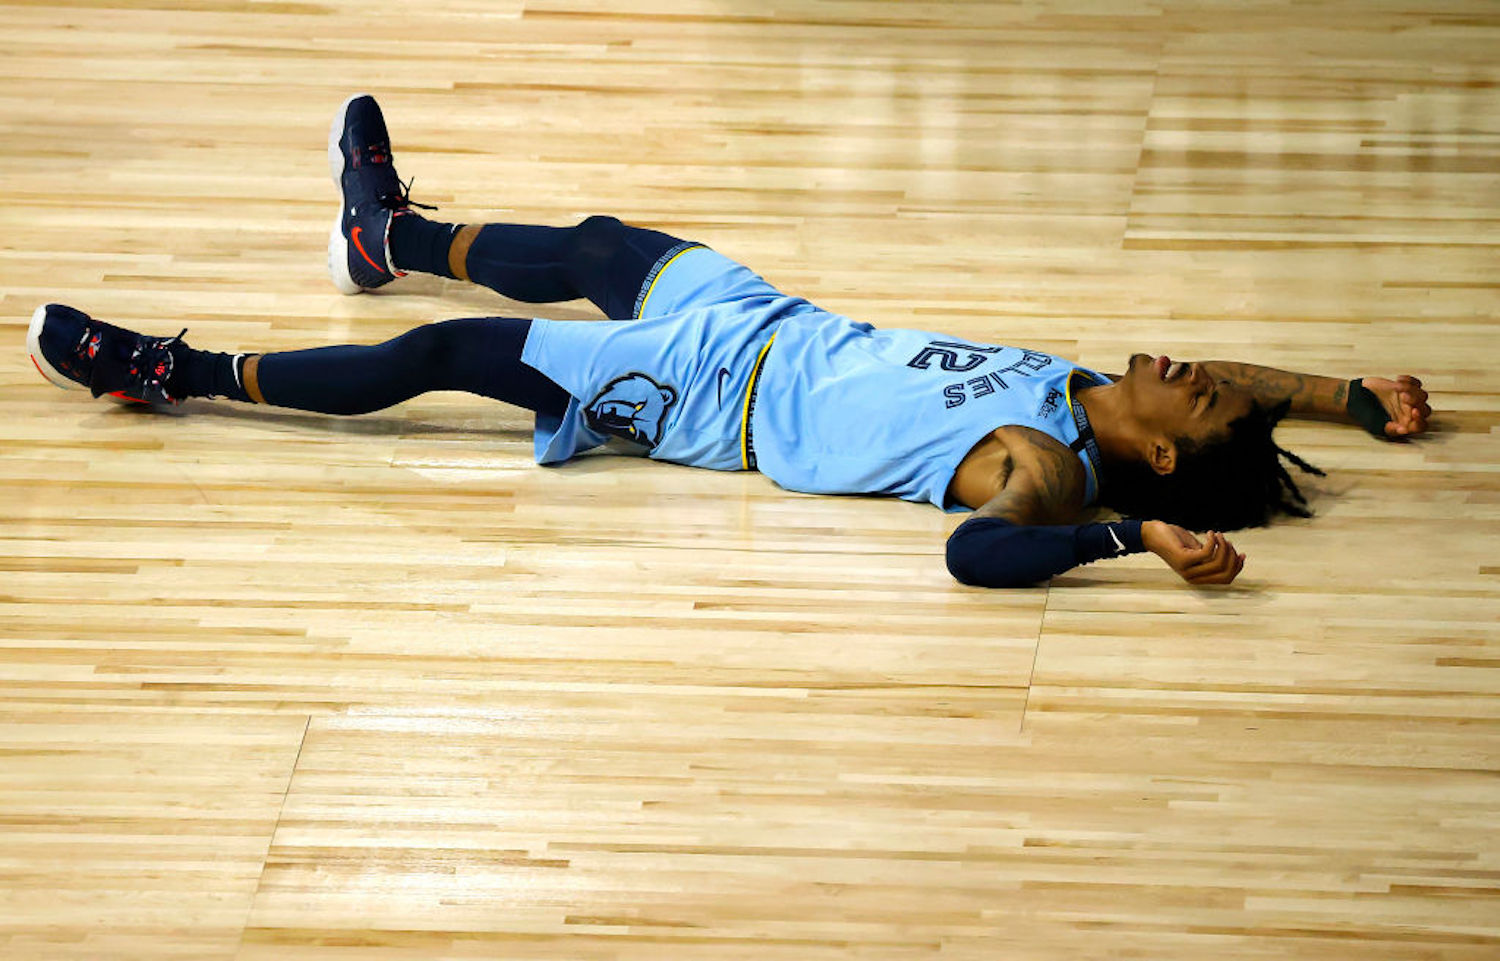 Ja Morant was wheeled off the court Monday after suffering an ankle sprain, but the X-ray made Grizzlies fans breathe a sigh of relief.